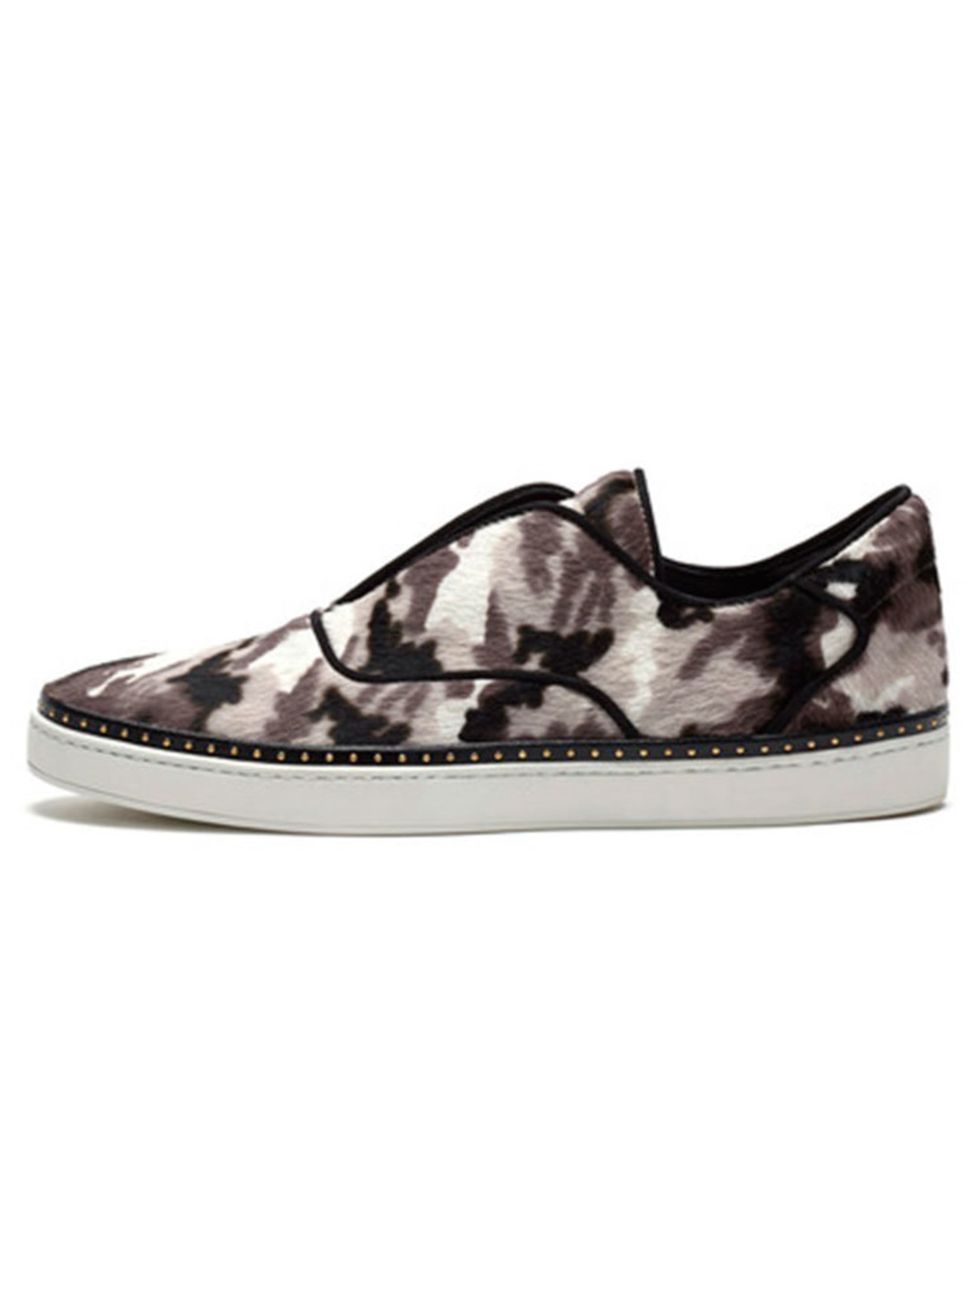 <p><a href="http://www.mulberry.com/shop/shoes/sneakers/mulberry-slip-on-sneaker-black-white-camouflage-haircalf" target="_blank">Mulberry</a> trainers £590</p>